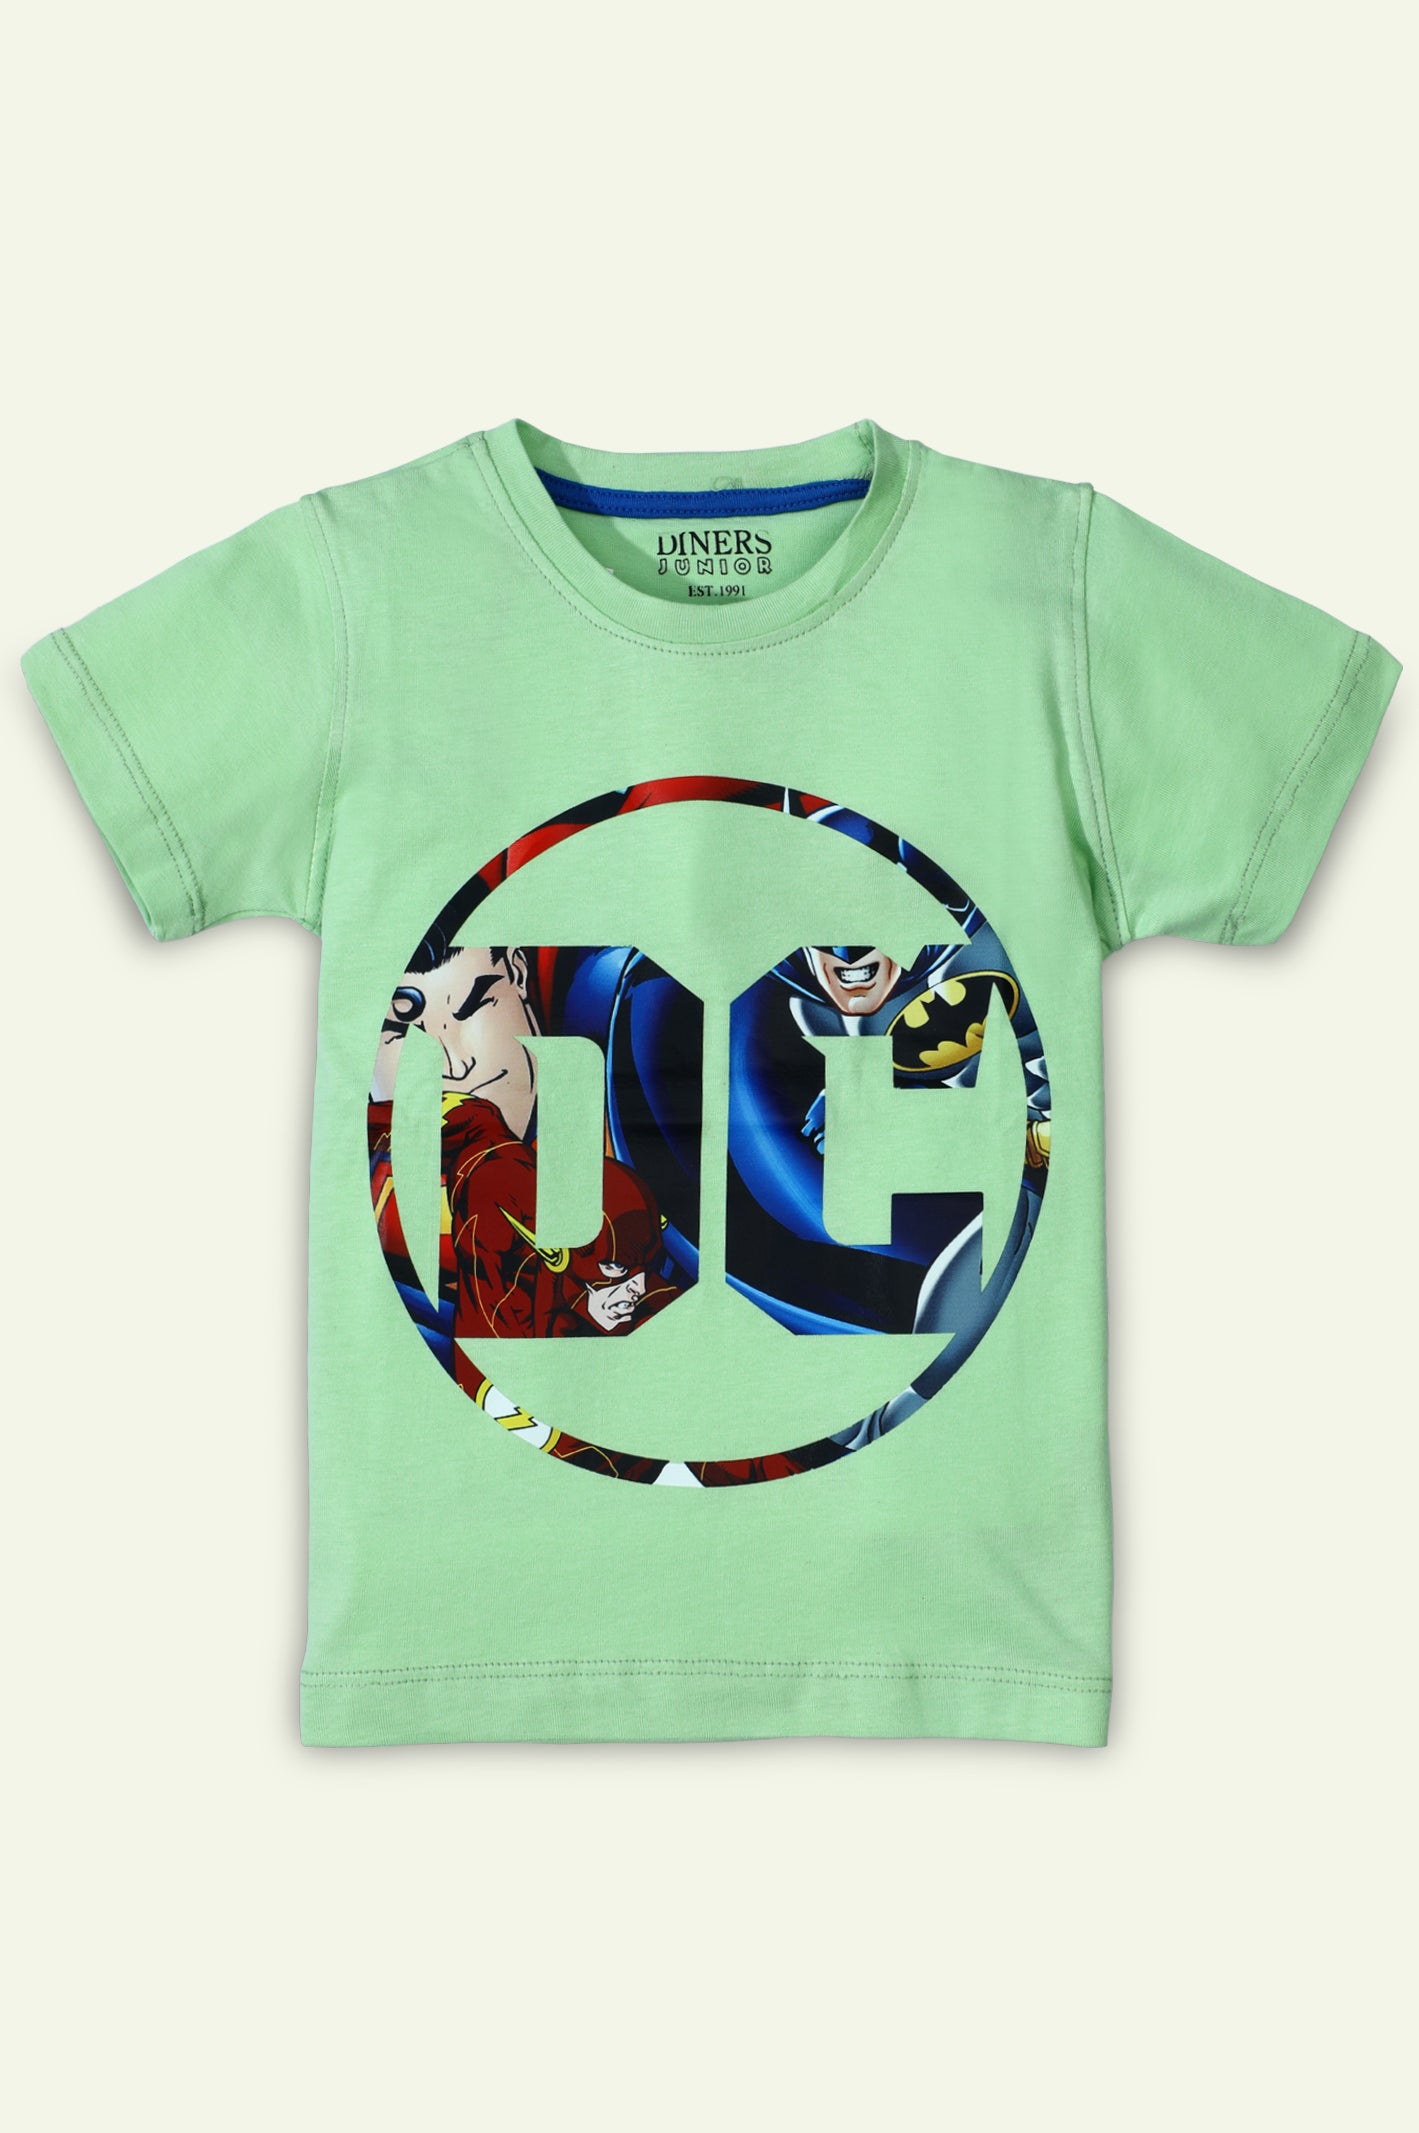 DC Comics Print Tees From Diners